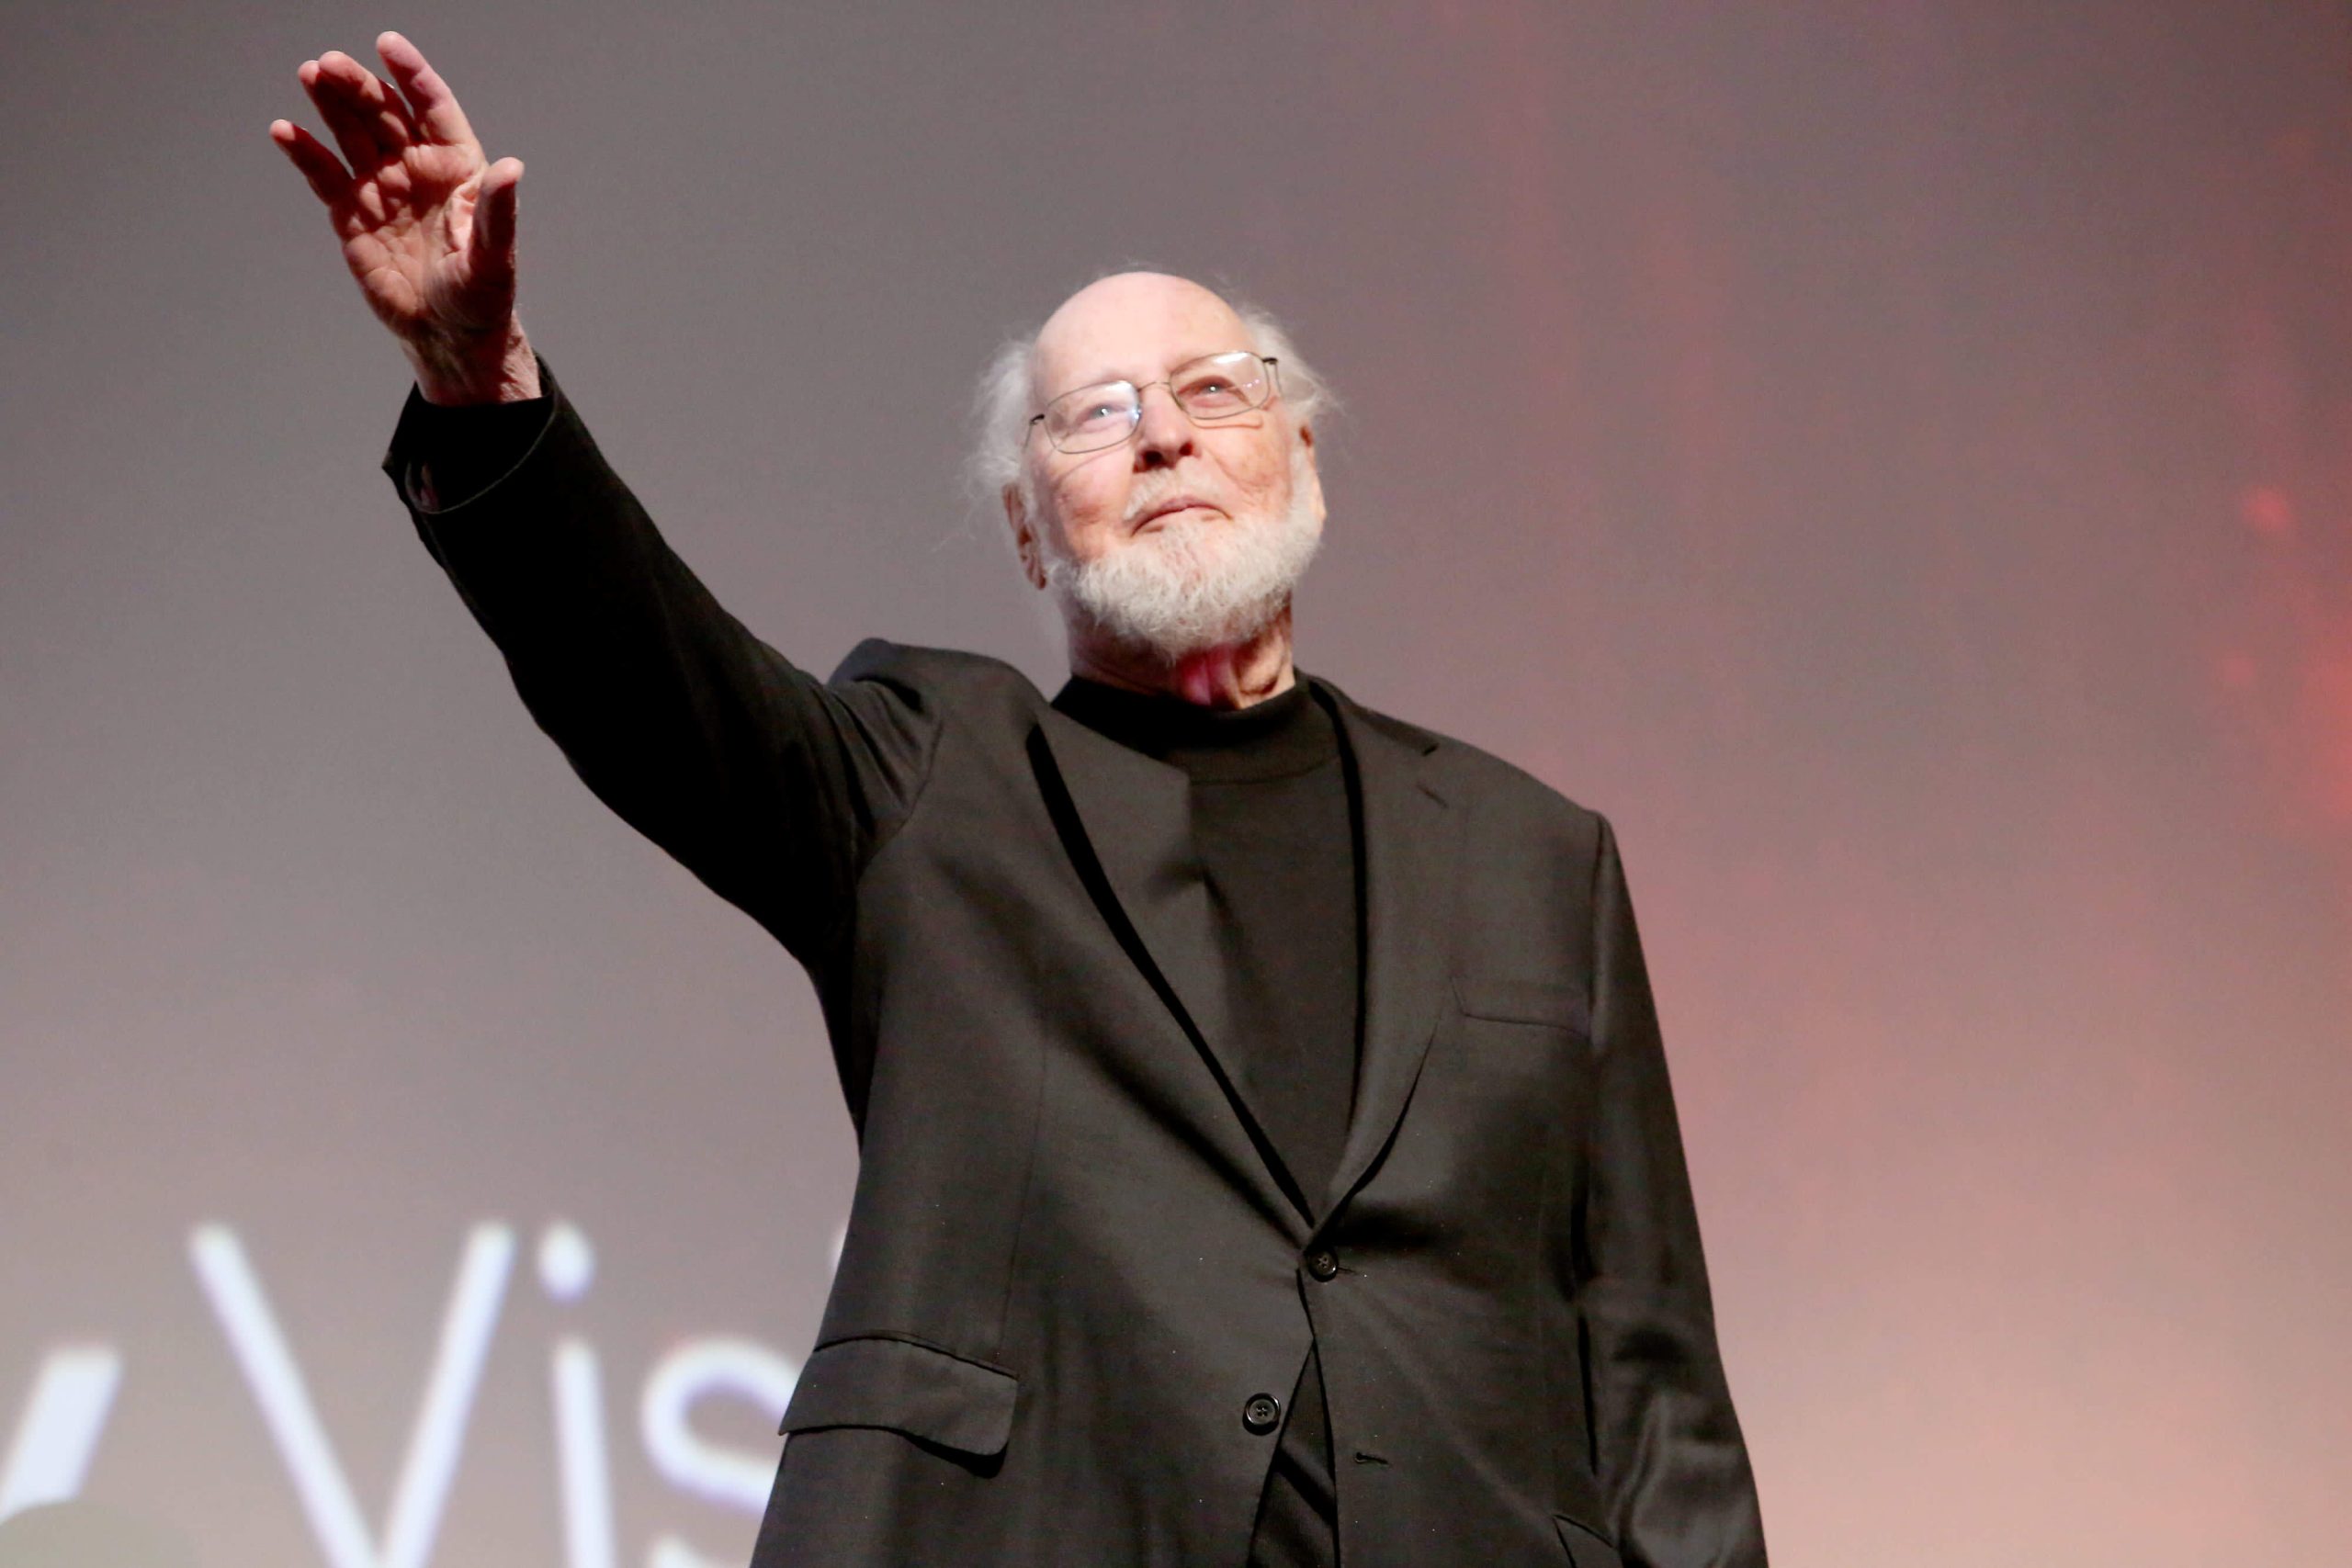 John Williams; Image by Jesse Grant/Getty